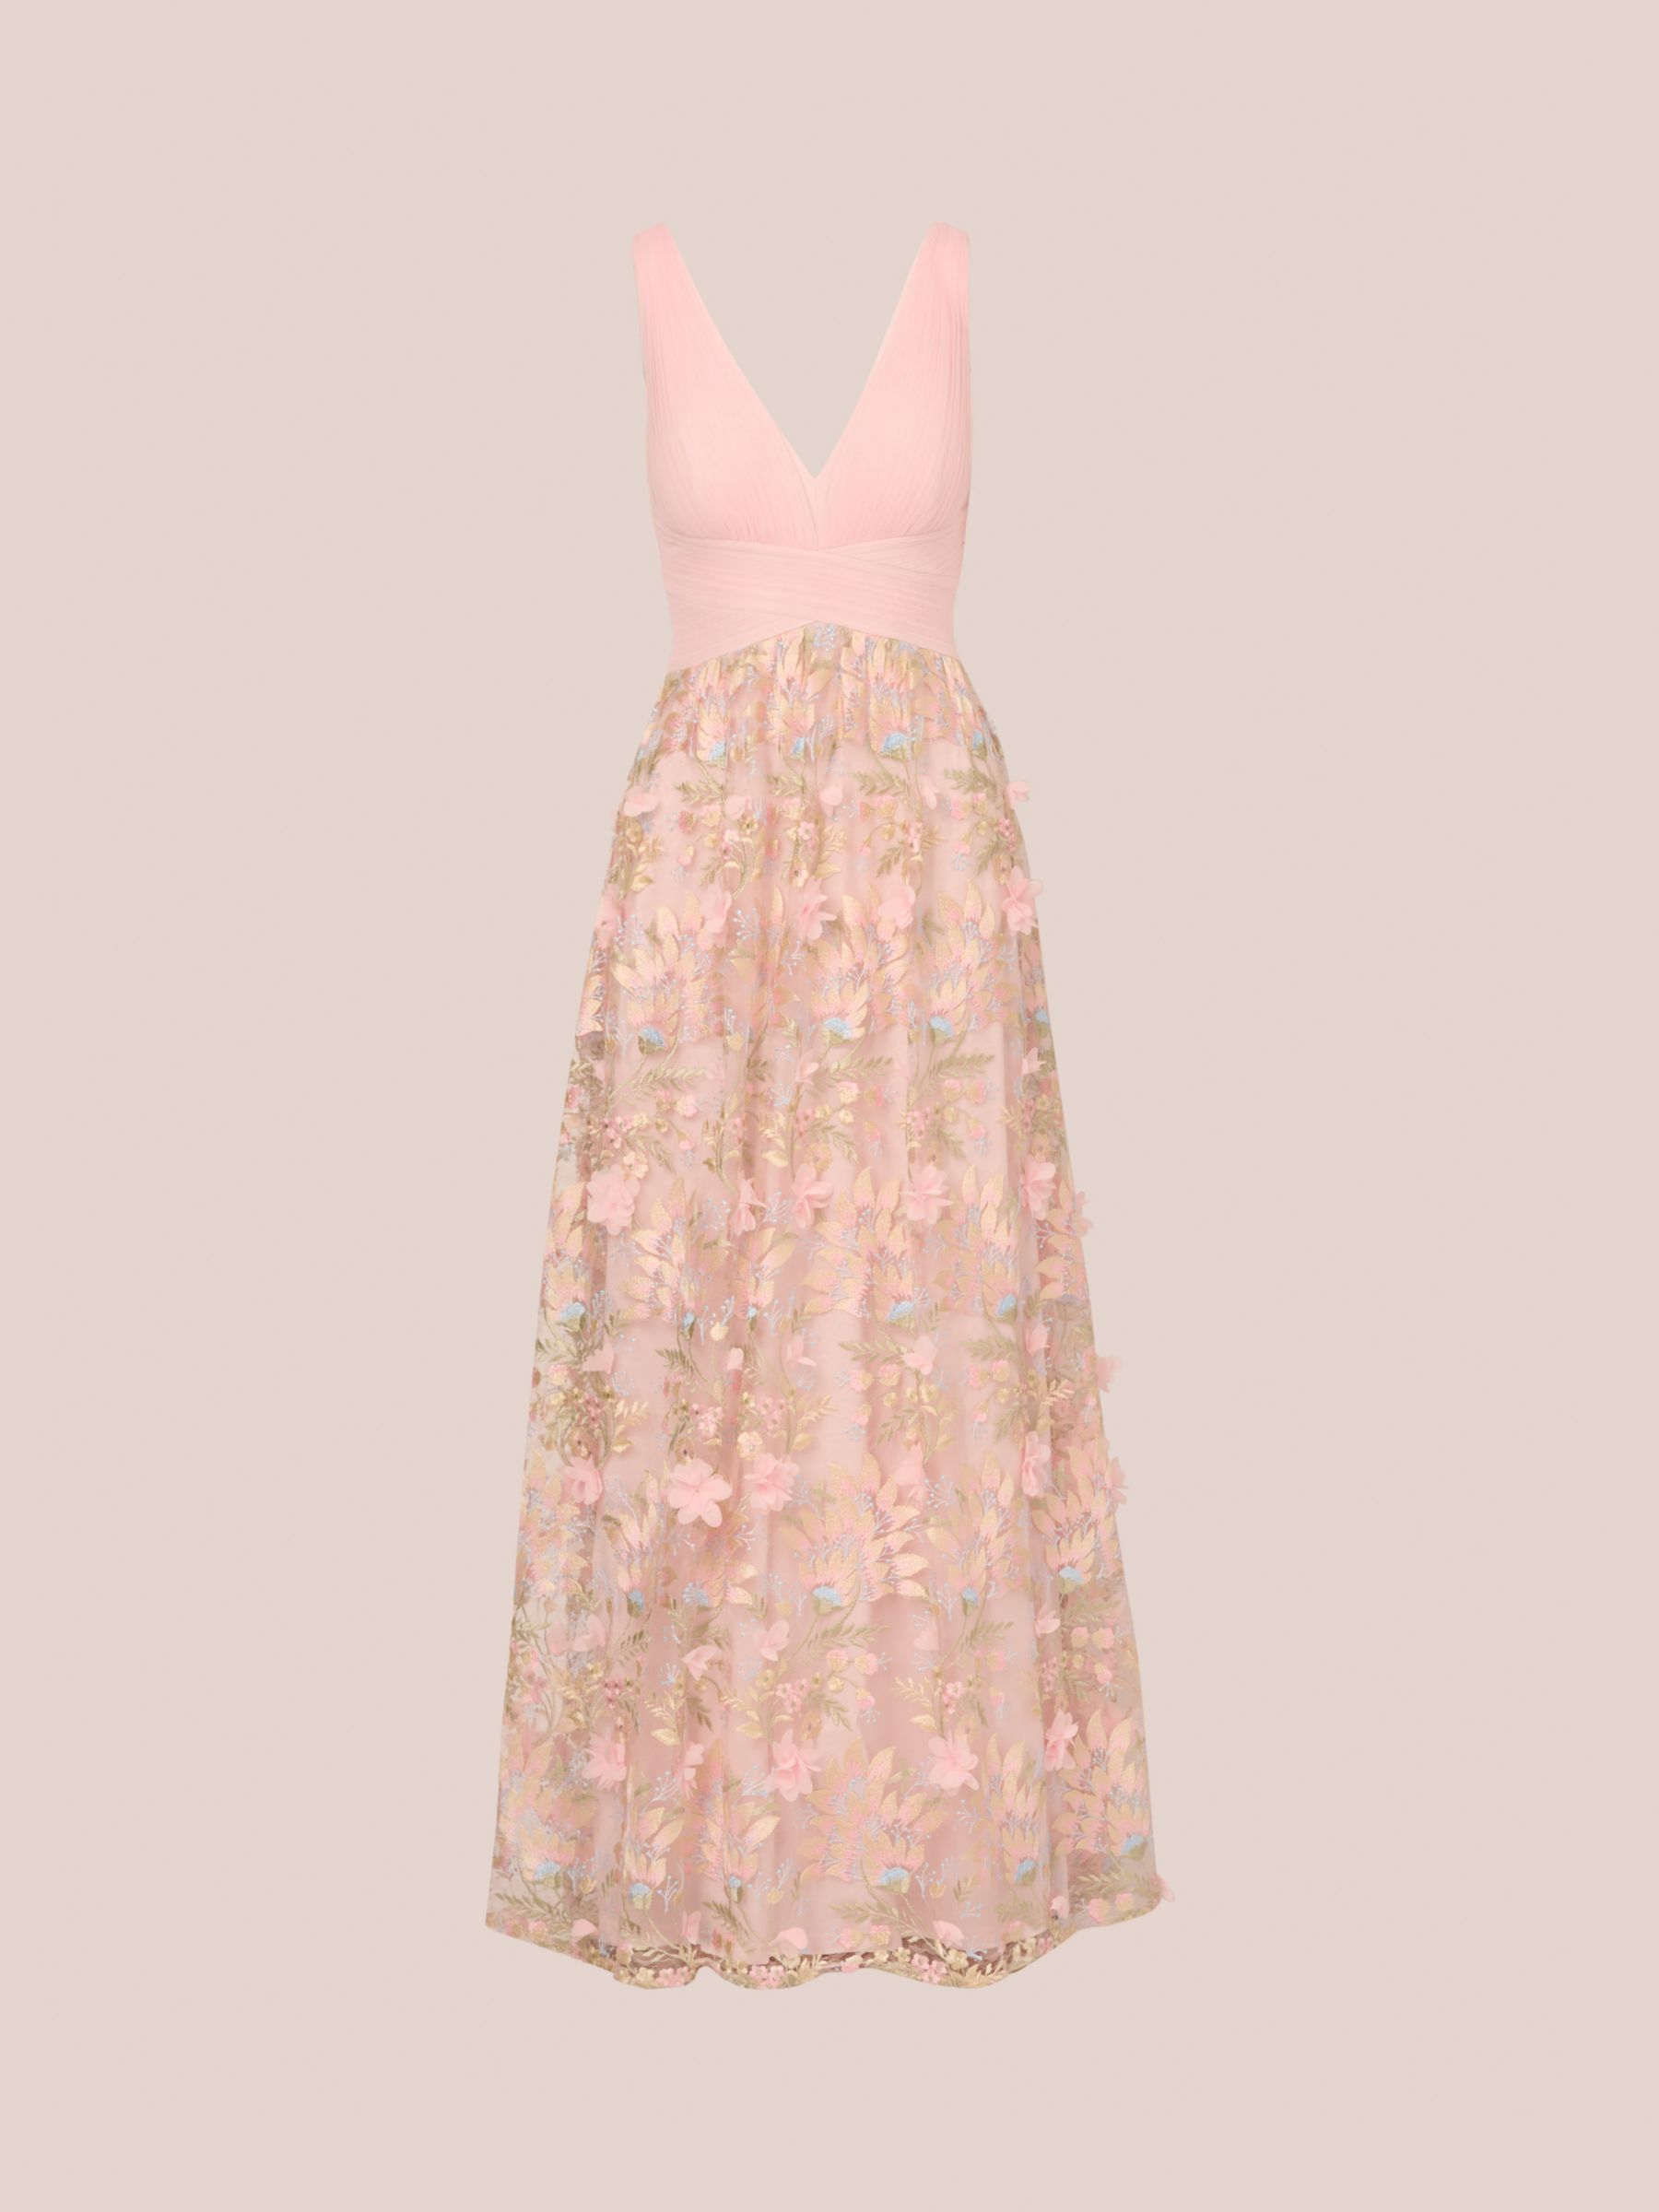 Buy Aidan Mattox by Adrianna Papell Embroidered Mesh Maxi Dress, Pink/Multi Online at johnlewis.com